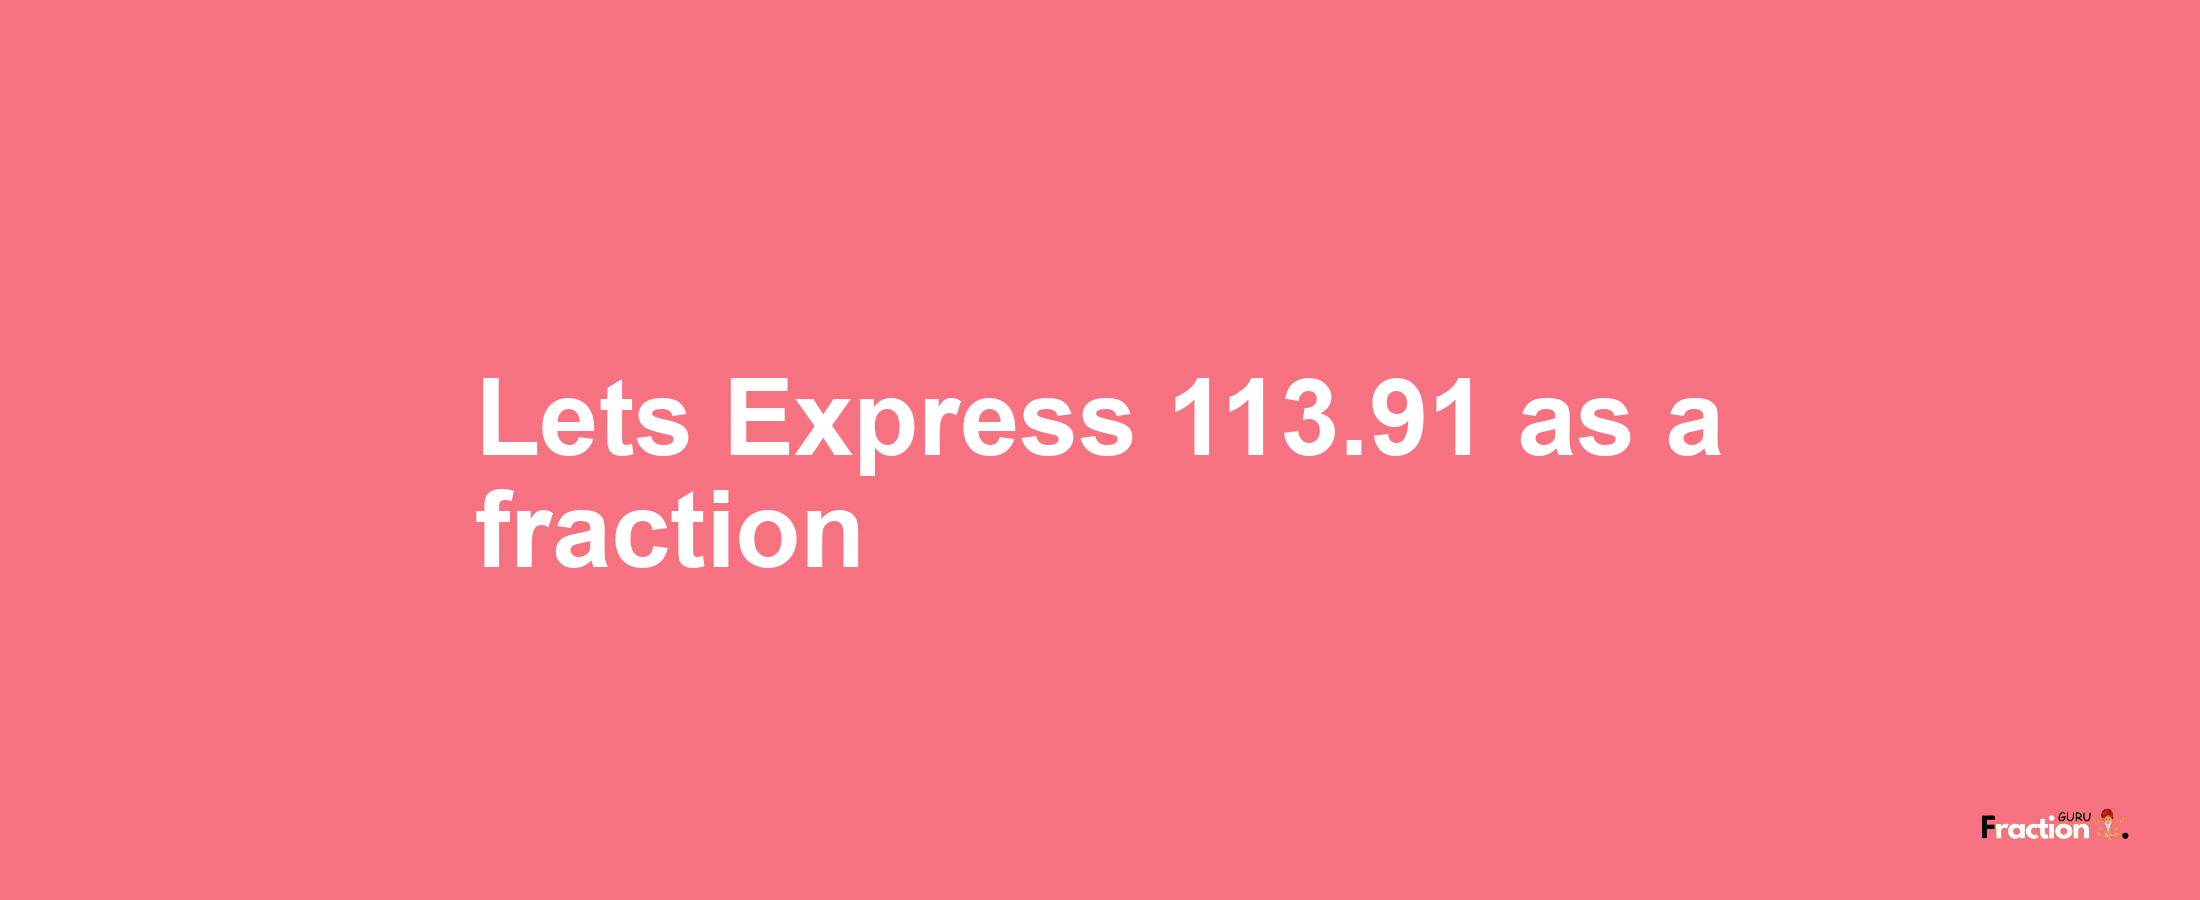 Lets Express 113.91 as afraction